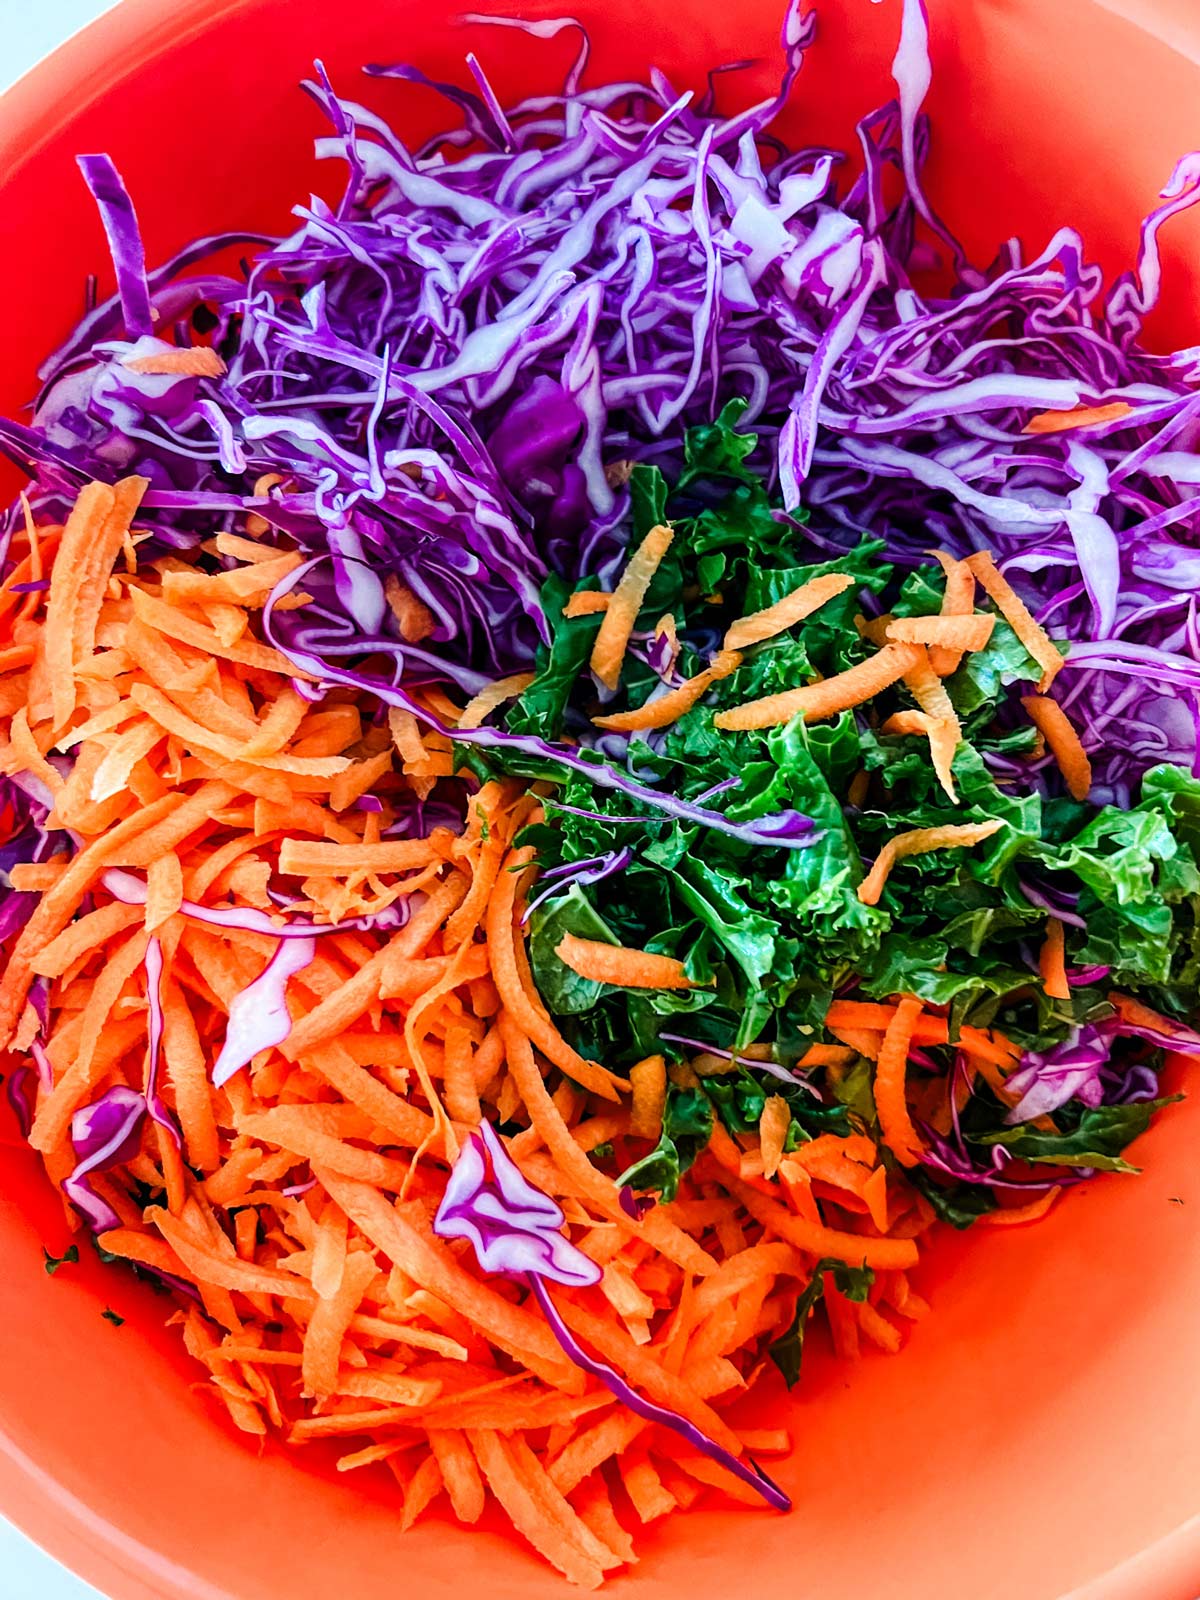 Massaged kale, carrot, and cabbage in an orange bowl.